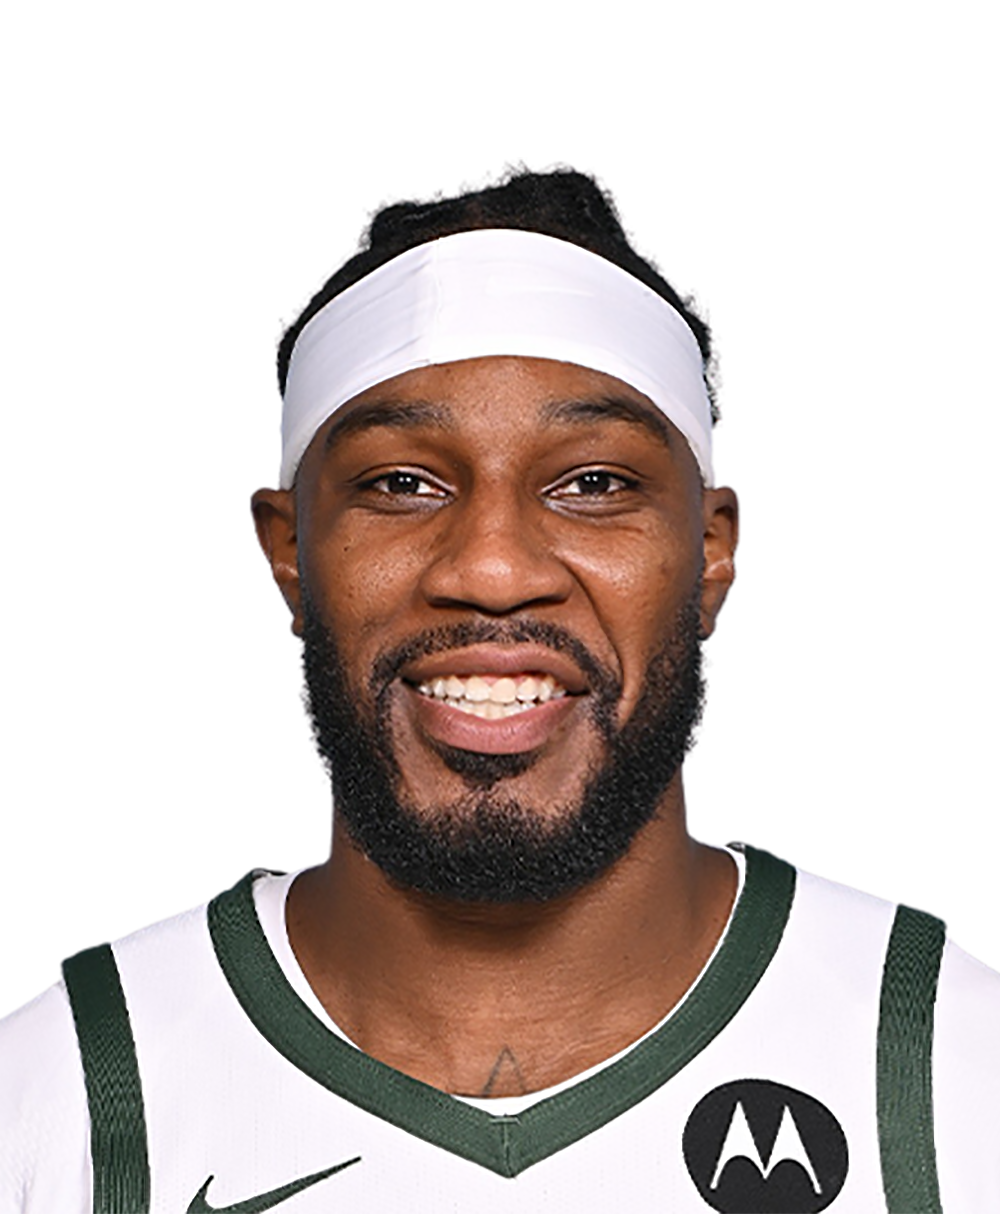 Dallas Mavericks: Why Jae Crowder Will Be the Steal of the NBA